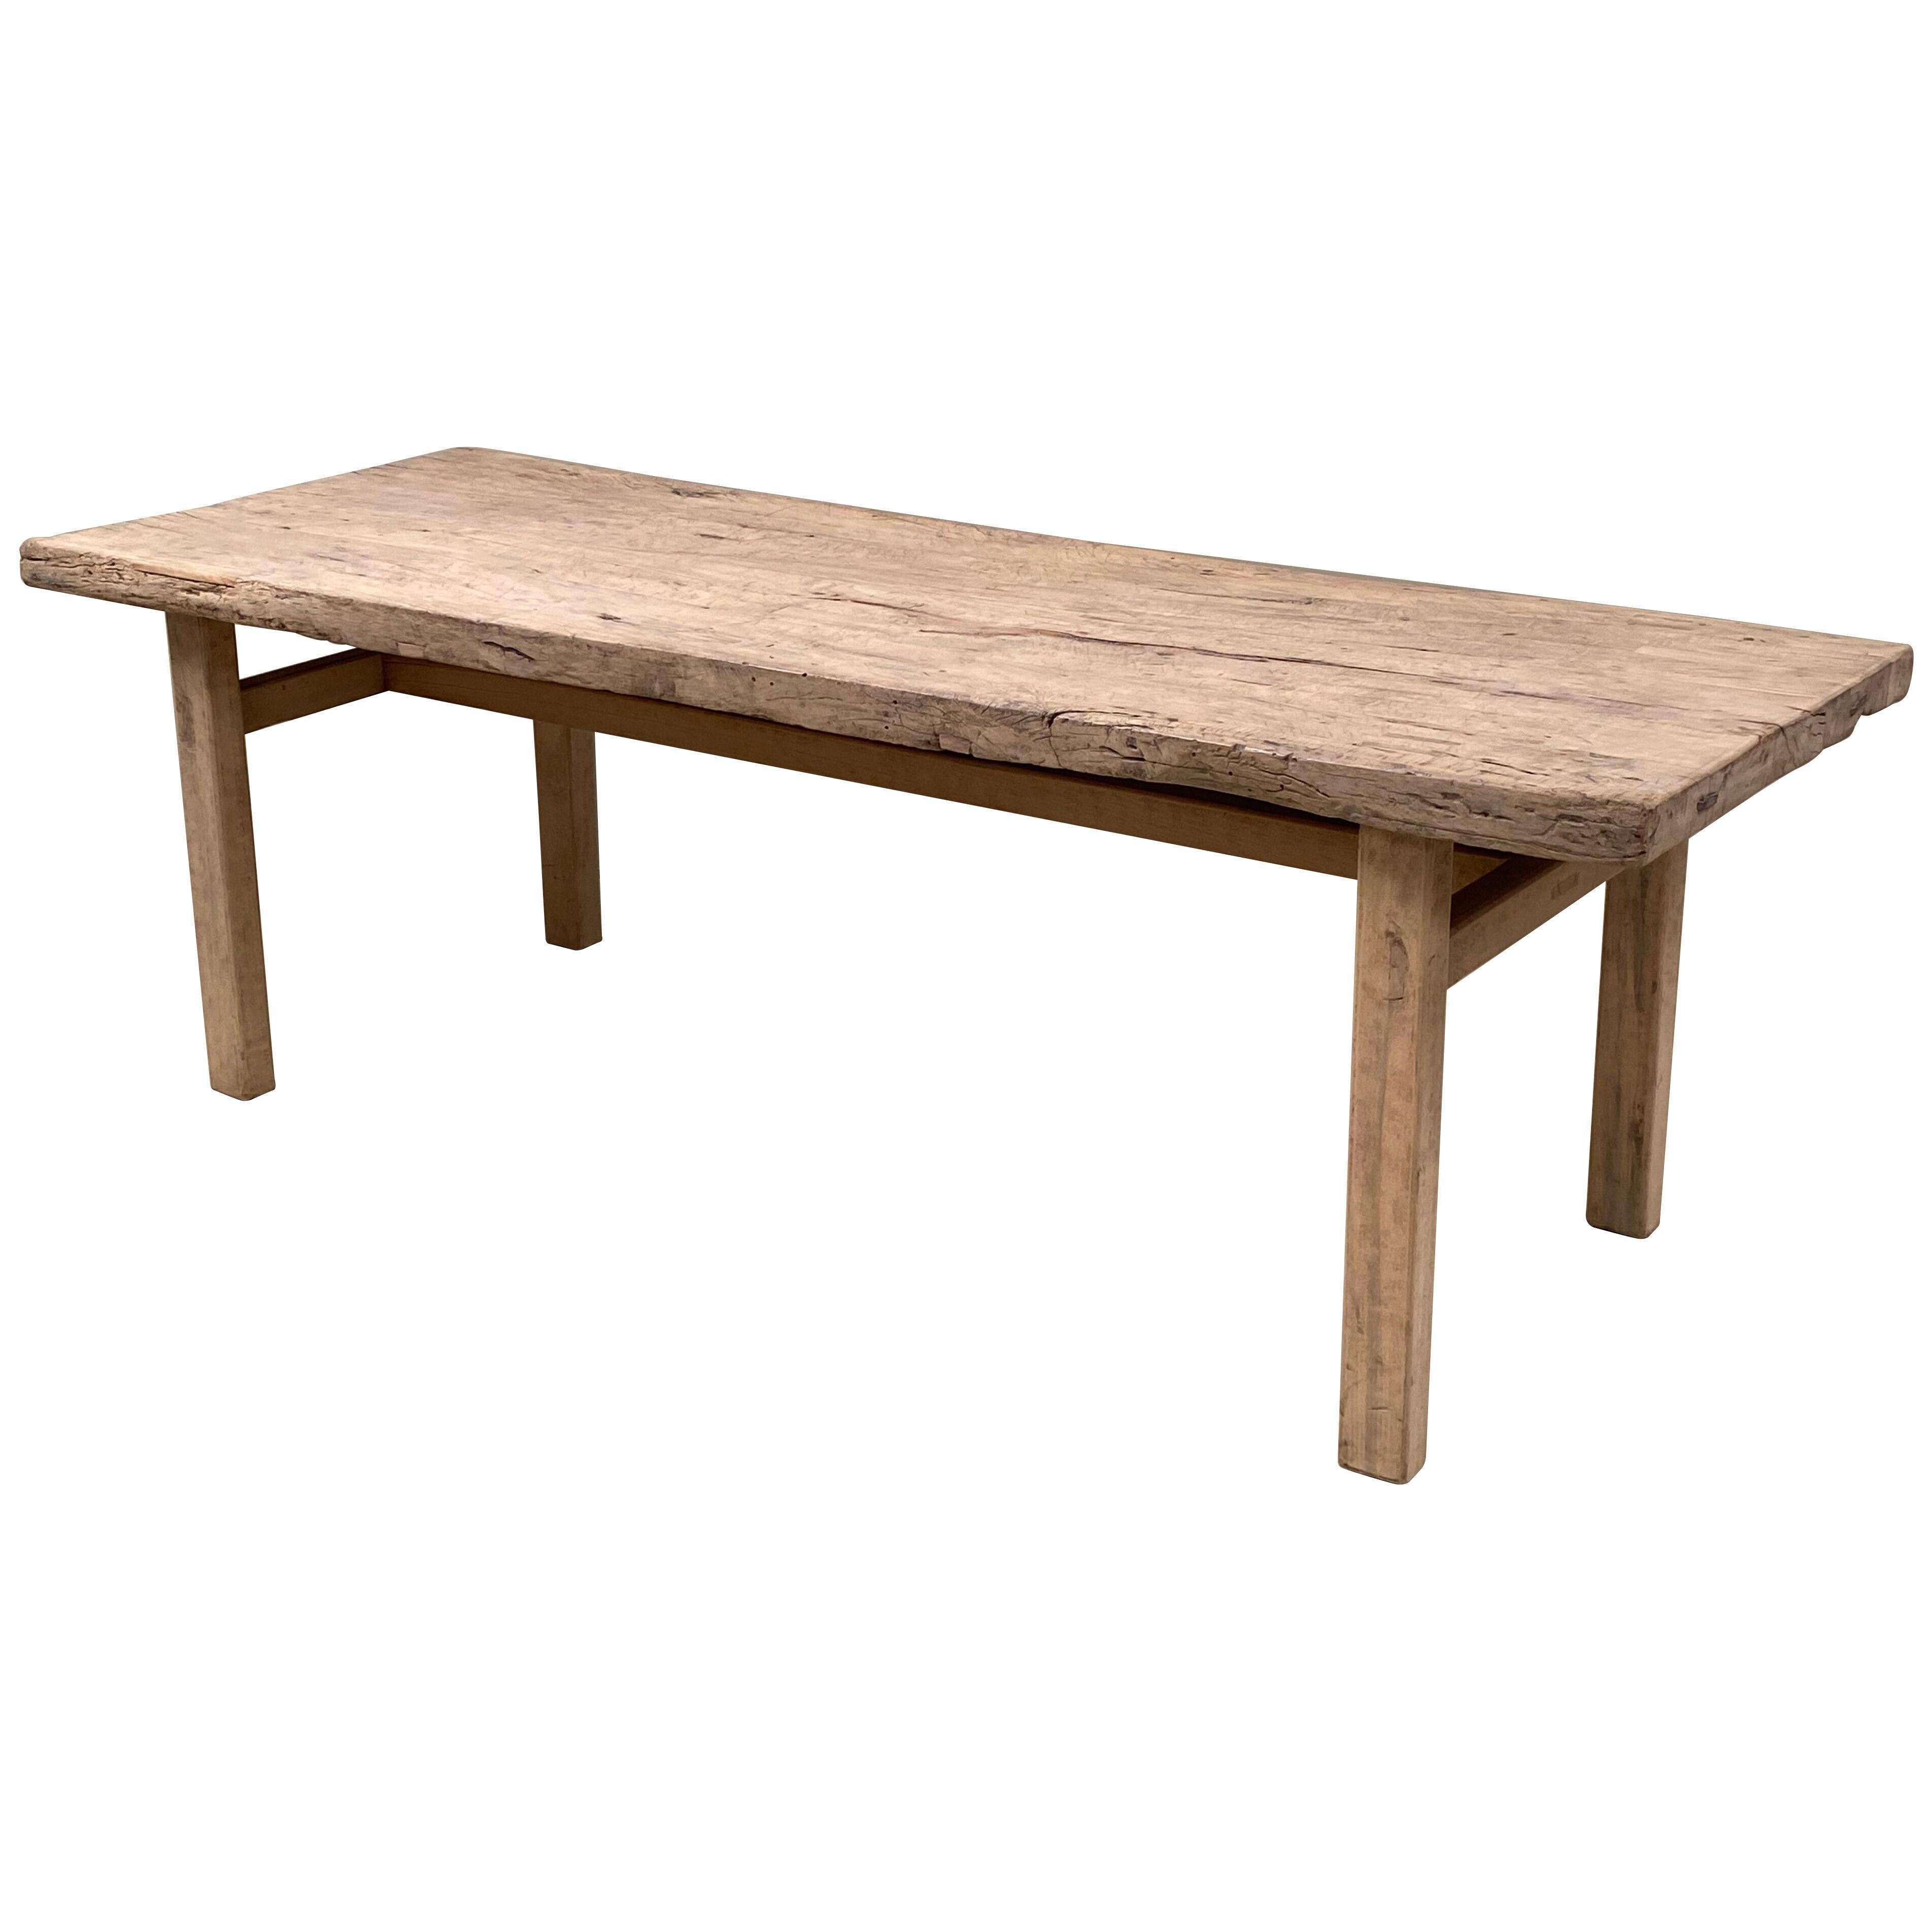 Rustic Dining Farm Table in A Bleached Elm Wood, France